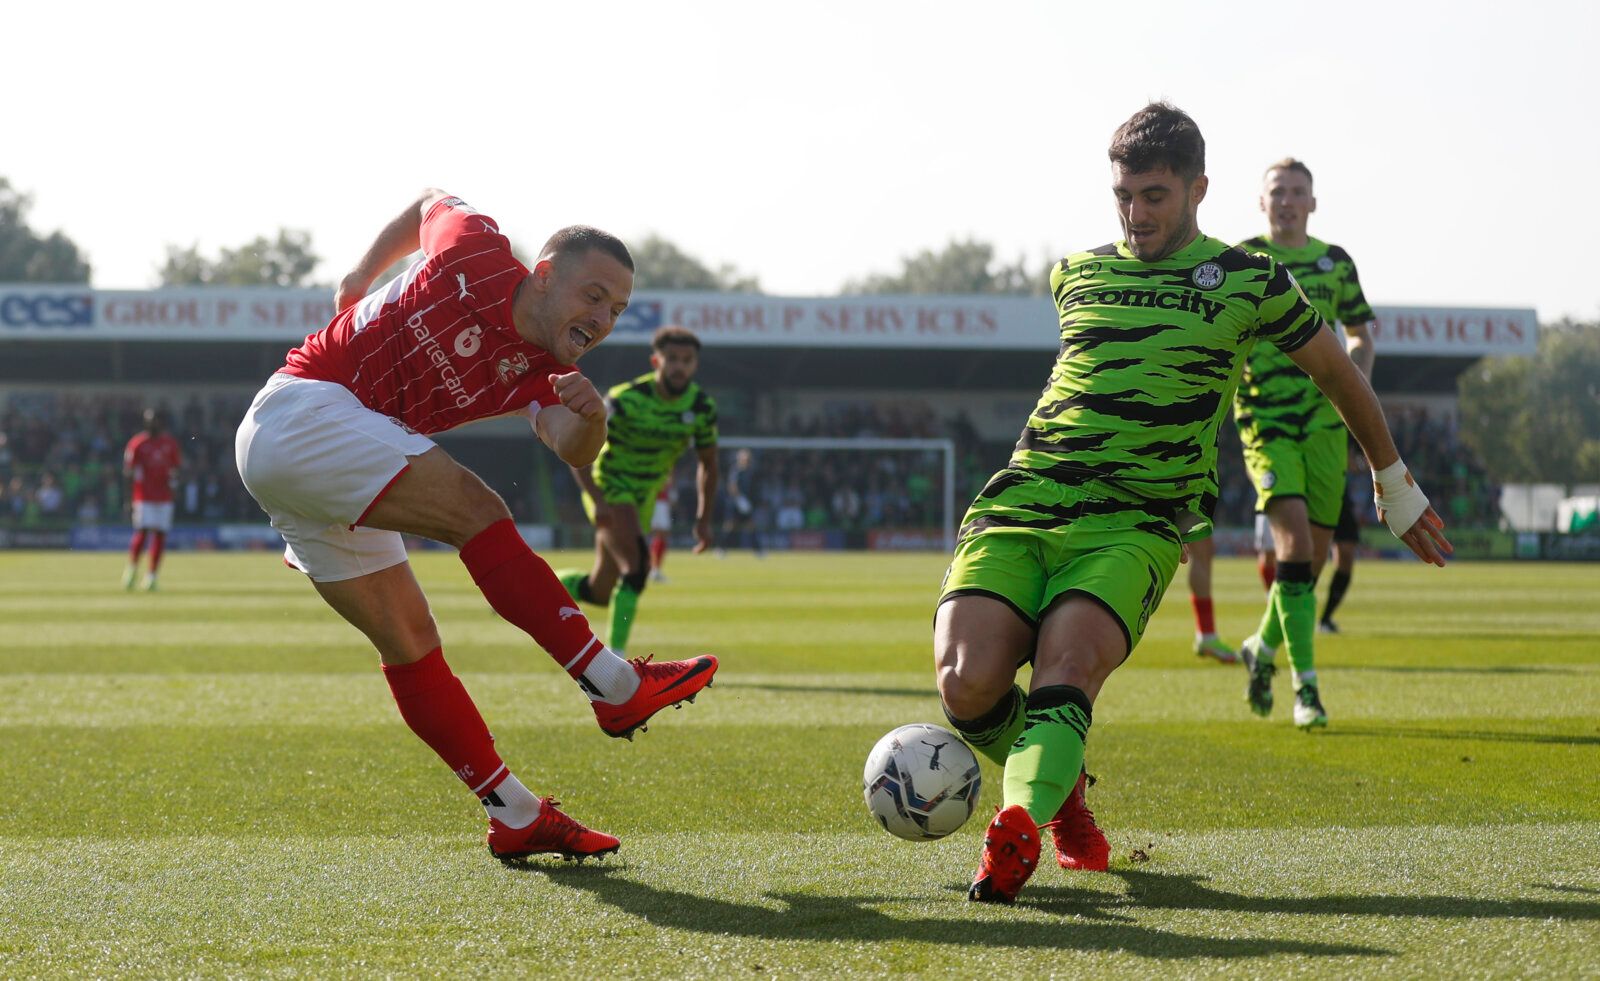 Soccer Football - League Two - Forest Green Rovers v Swindon Town - The New Lawn Stadium, Nailsworth, Britain - October 9, 2021 Forest Green Rovers’ Jordan Moore Taylor in action with Swindon Town’s Jack Payne Action Images/Matthew Childs EDITORIAL USE ONLY. No use with unauthorized audio, video, data, fixture lists, club/league logos or 'live' services. Online in-match use limited to 75 images, no video emulation. No use in betting, games or single club /league/player publications.  Please cont